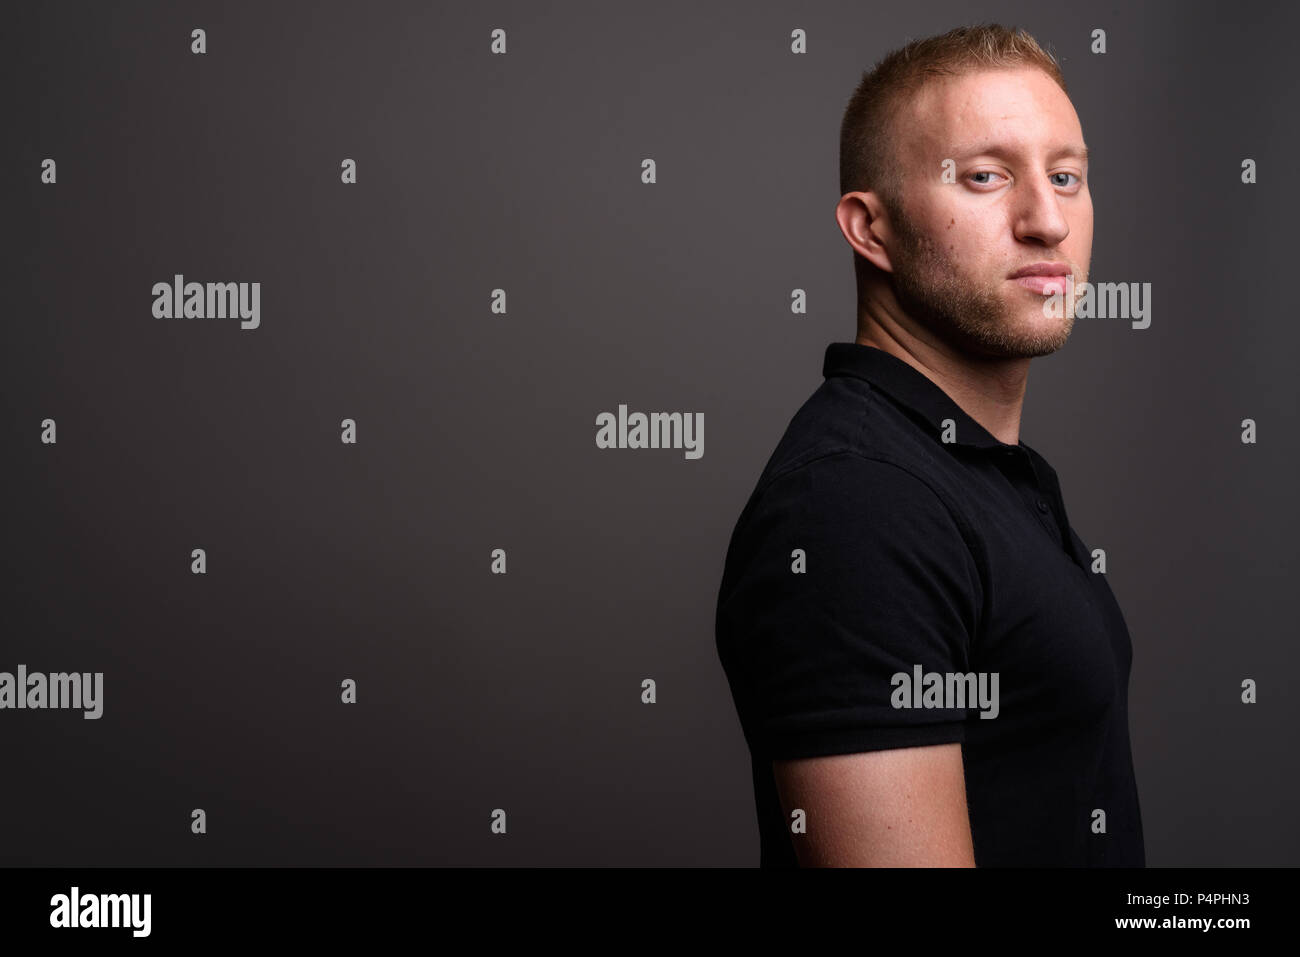 Man with blond hair wearing black polo shirt against gray backgr Stock Photo